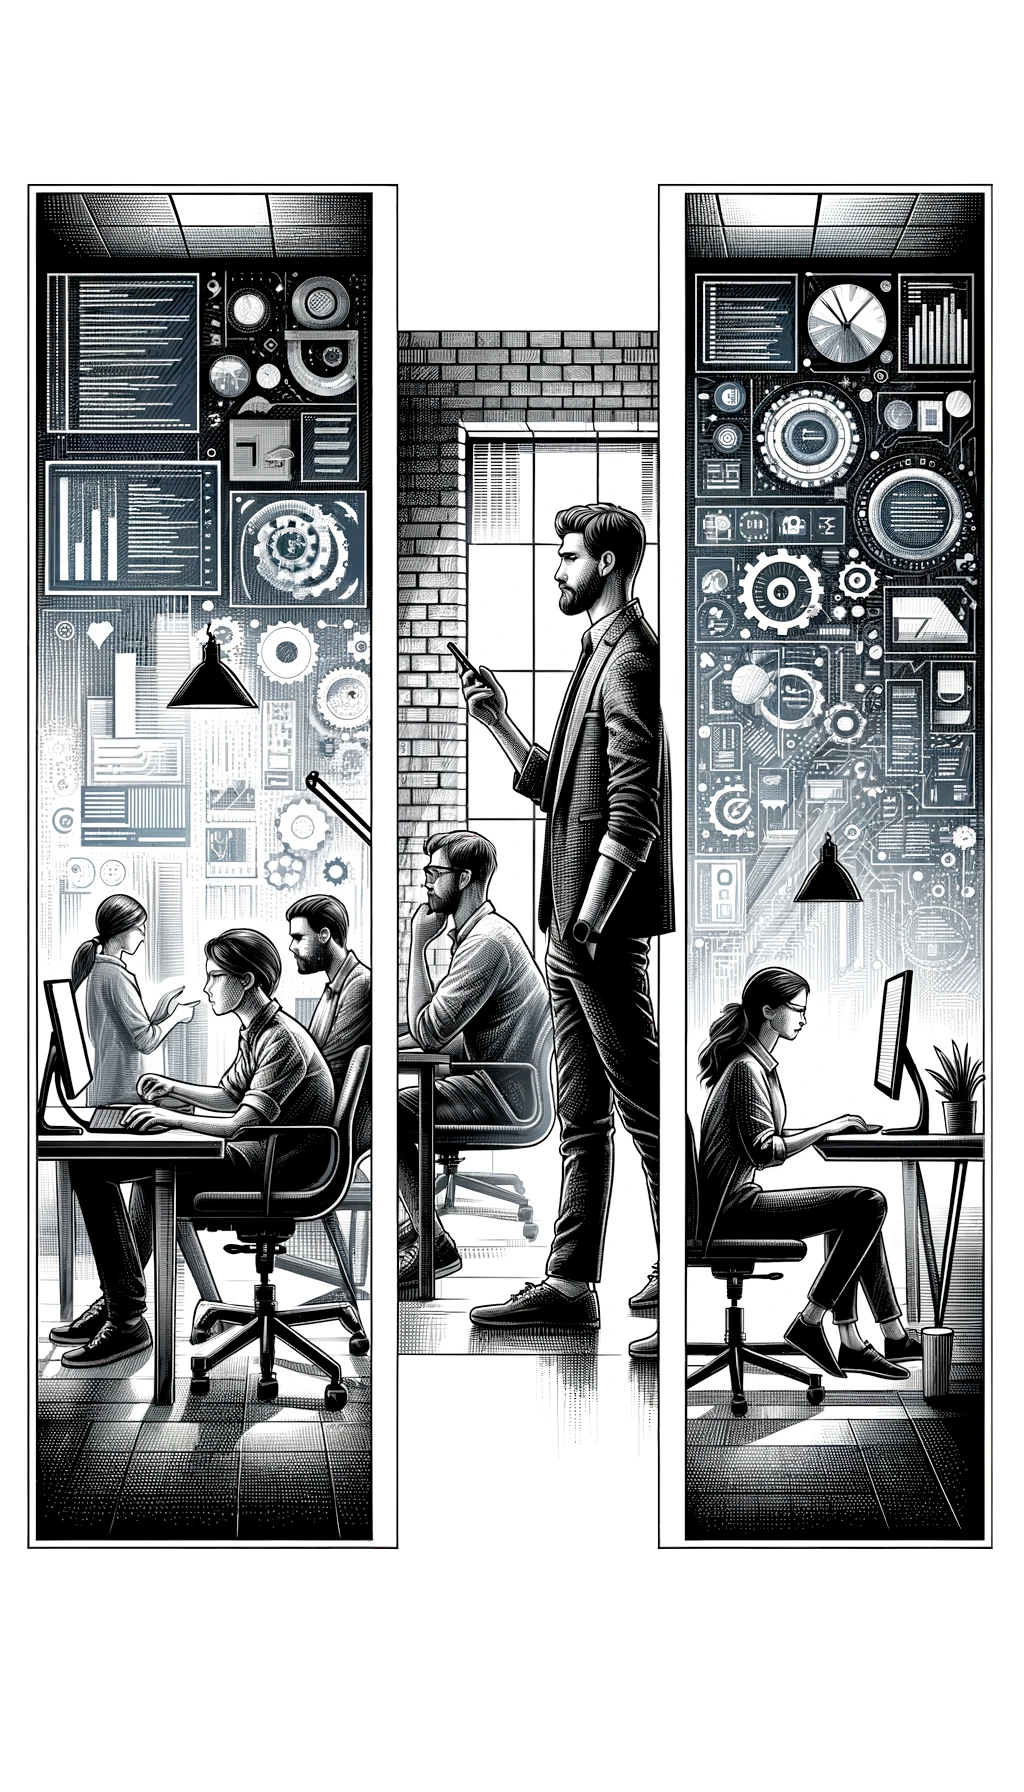 Triptych illustration of a modern tech office, showcasing detailed black and white artwork of employees working, technology interfaces, and data visualization screens.